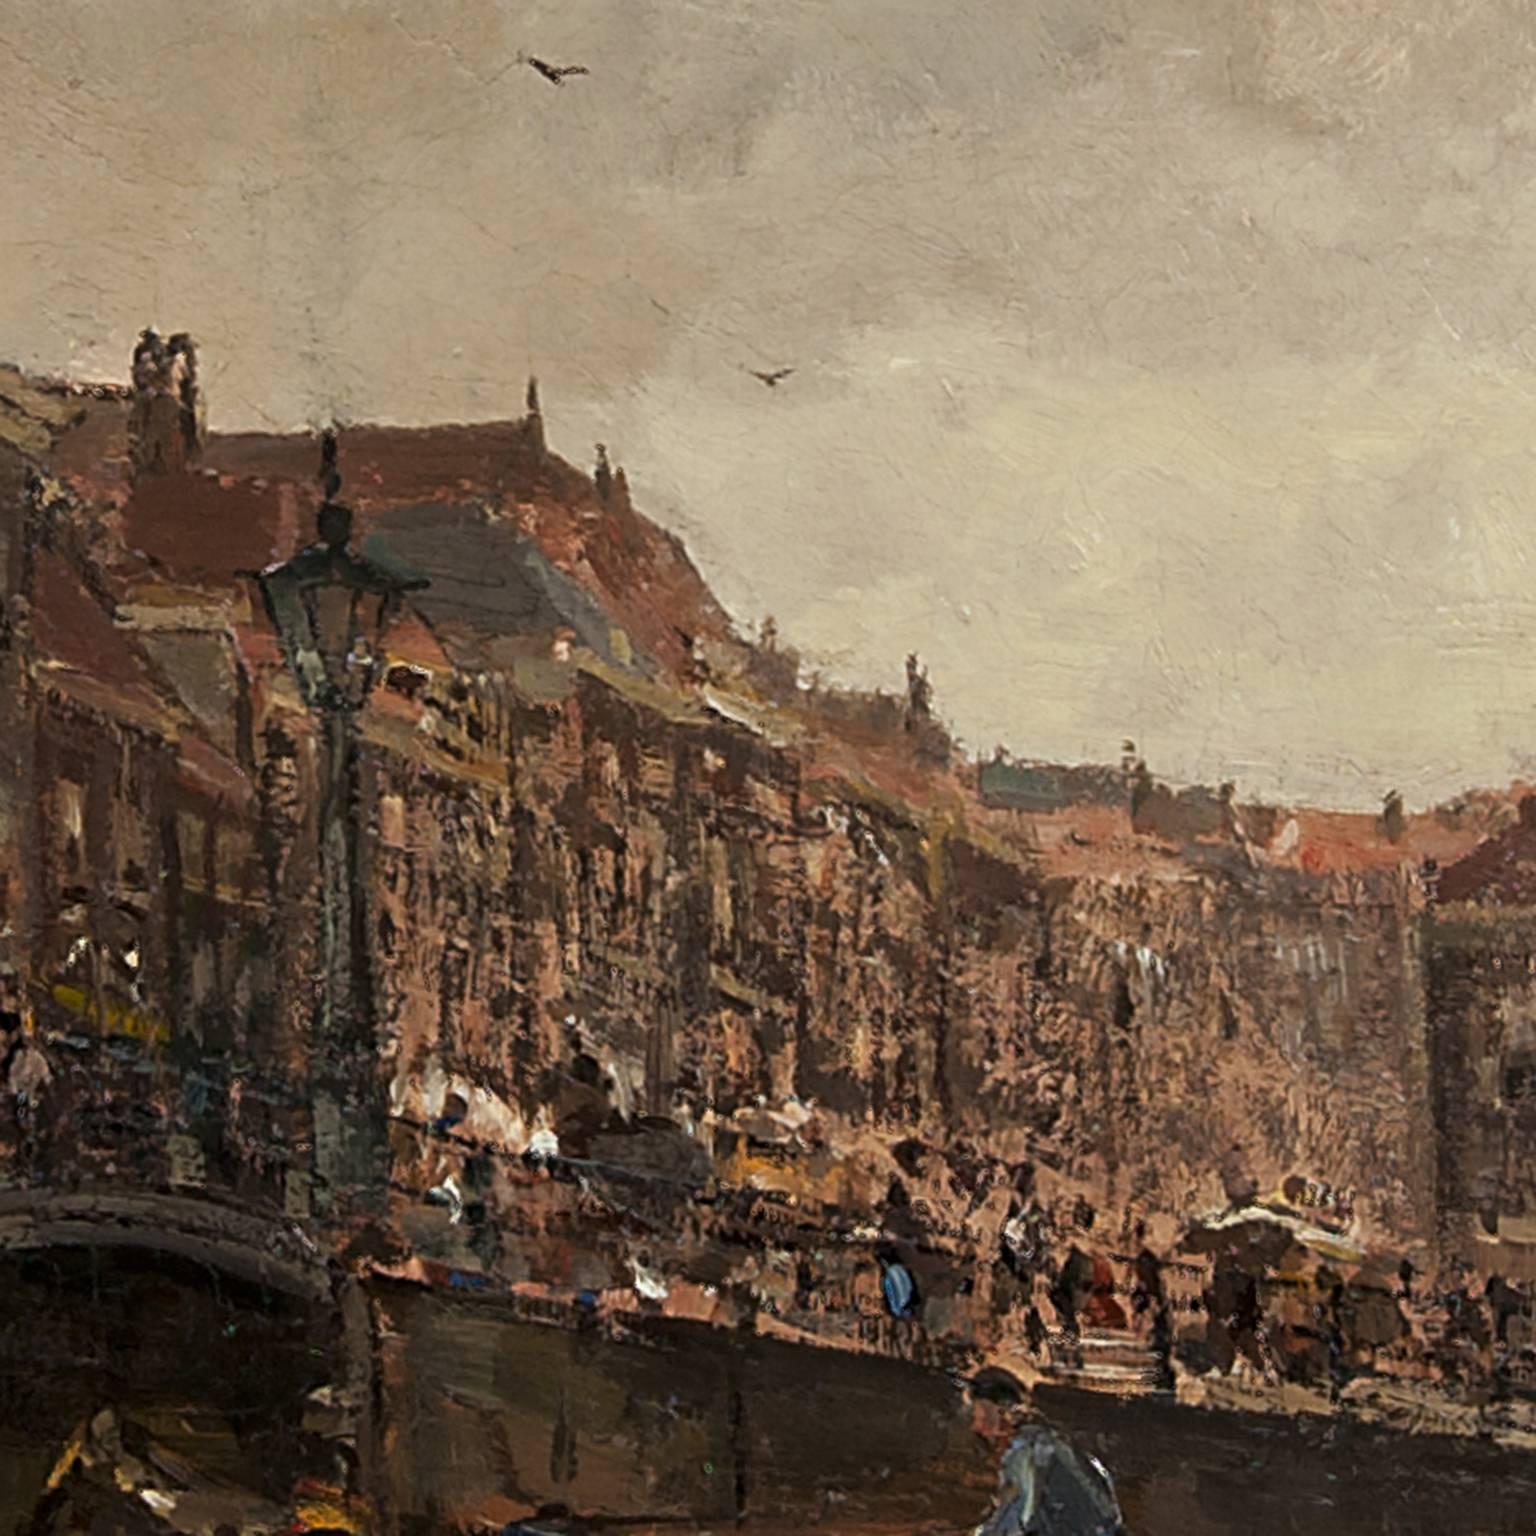 The Hague painter of landscapes and marines Kees van Waning experienced an interesting development. He was trained by the rather traditional working painter of cityscapes Carel Behr. Willem Maris, however, advised him to paint outside, a counsel he